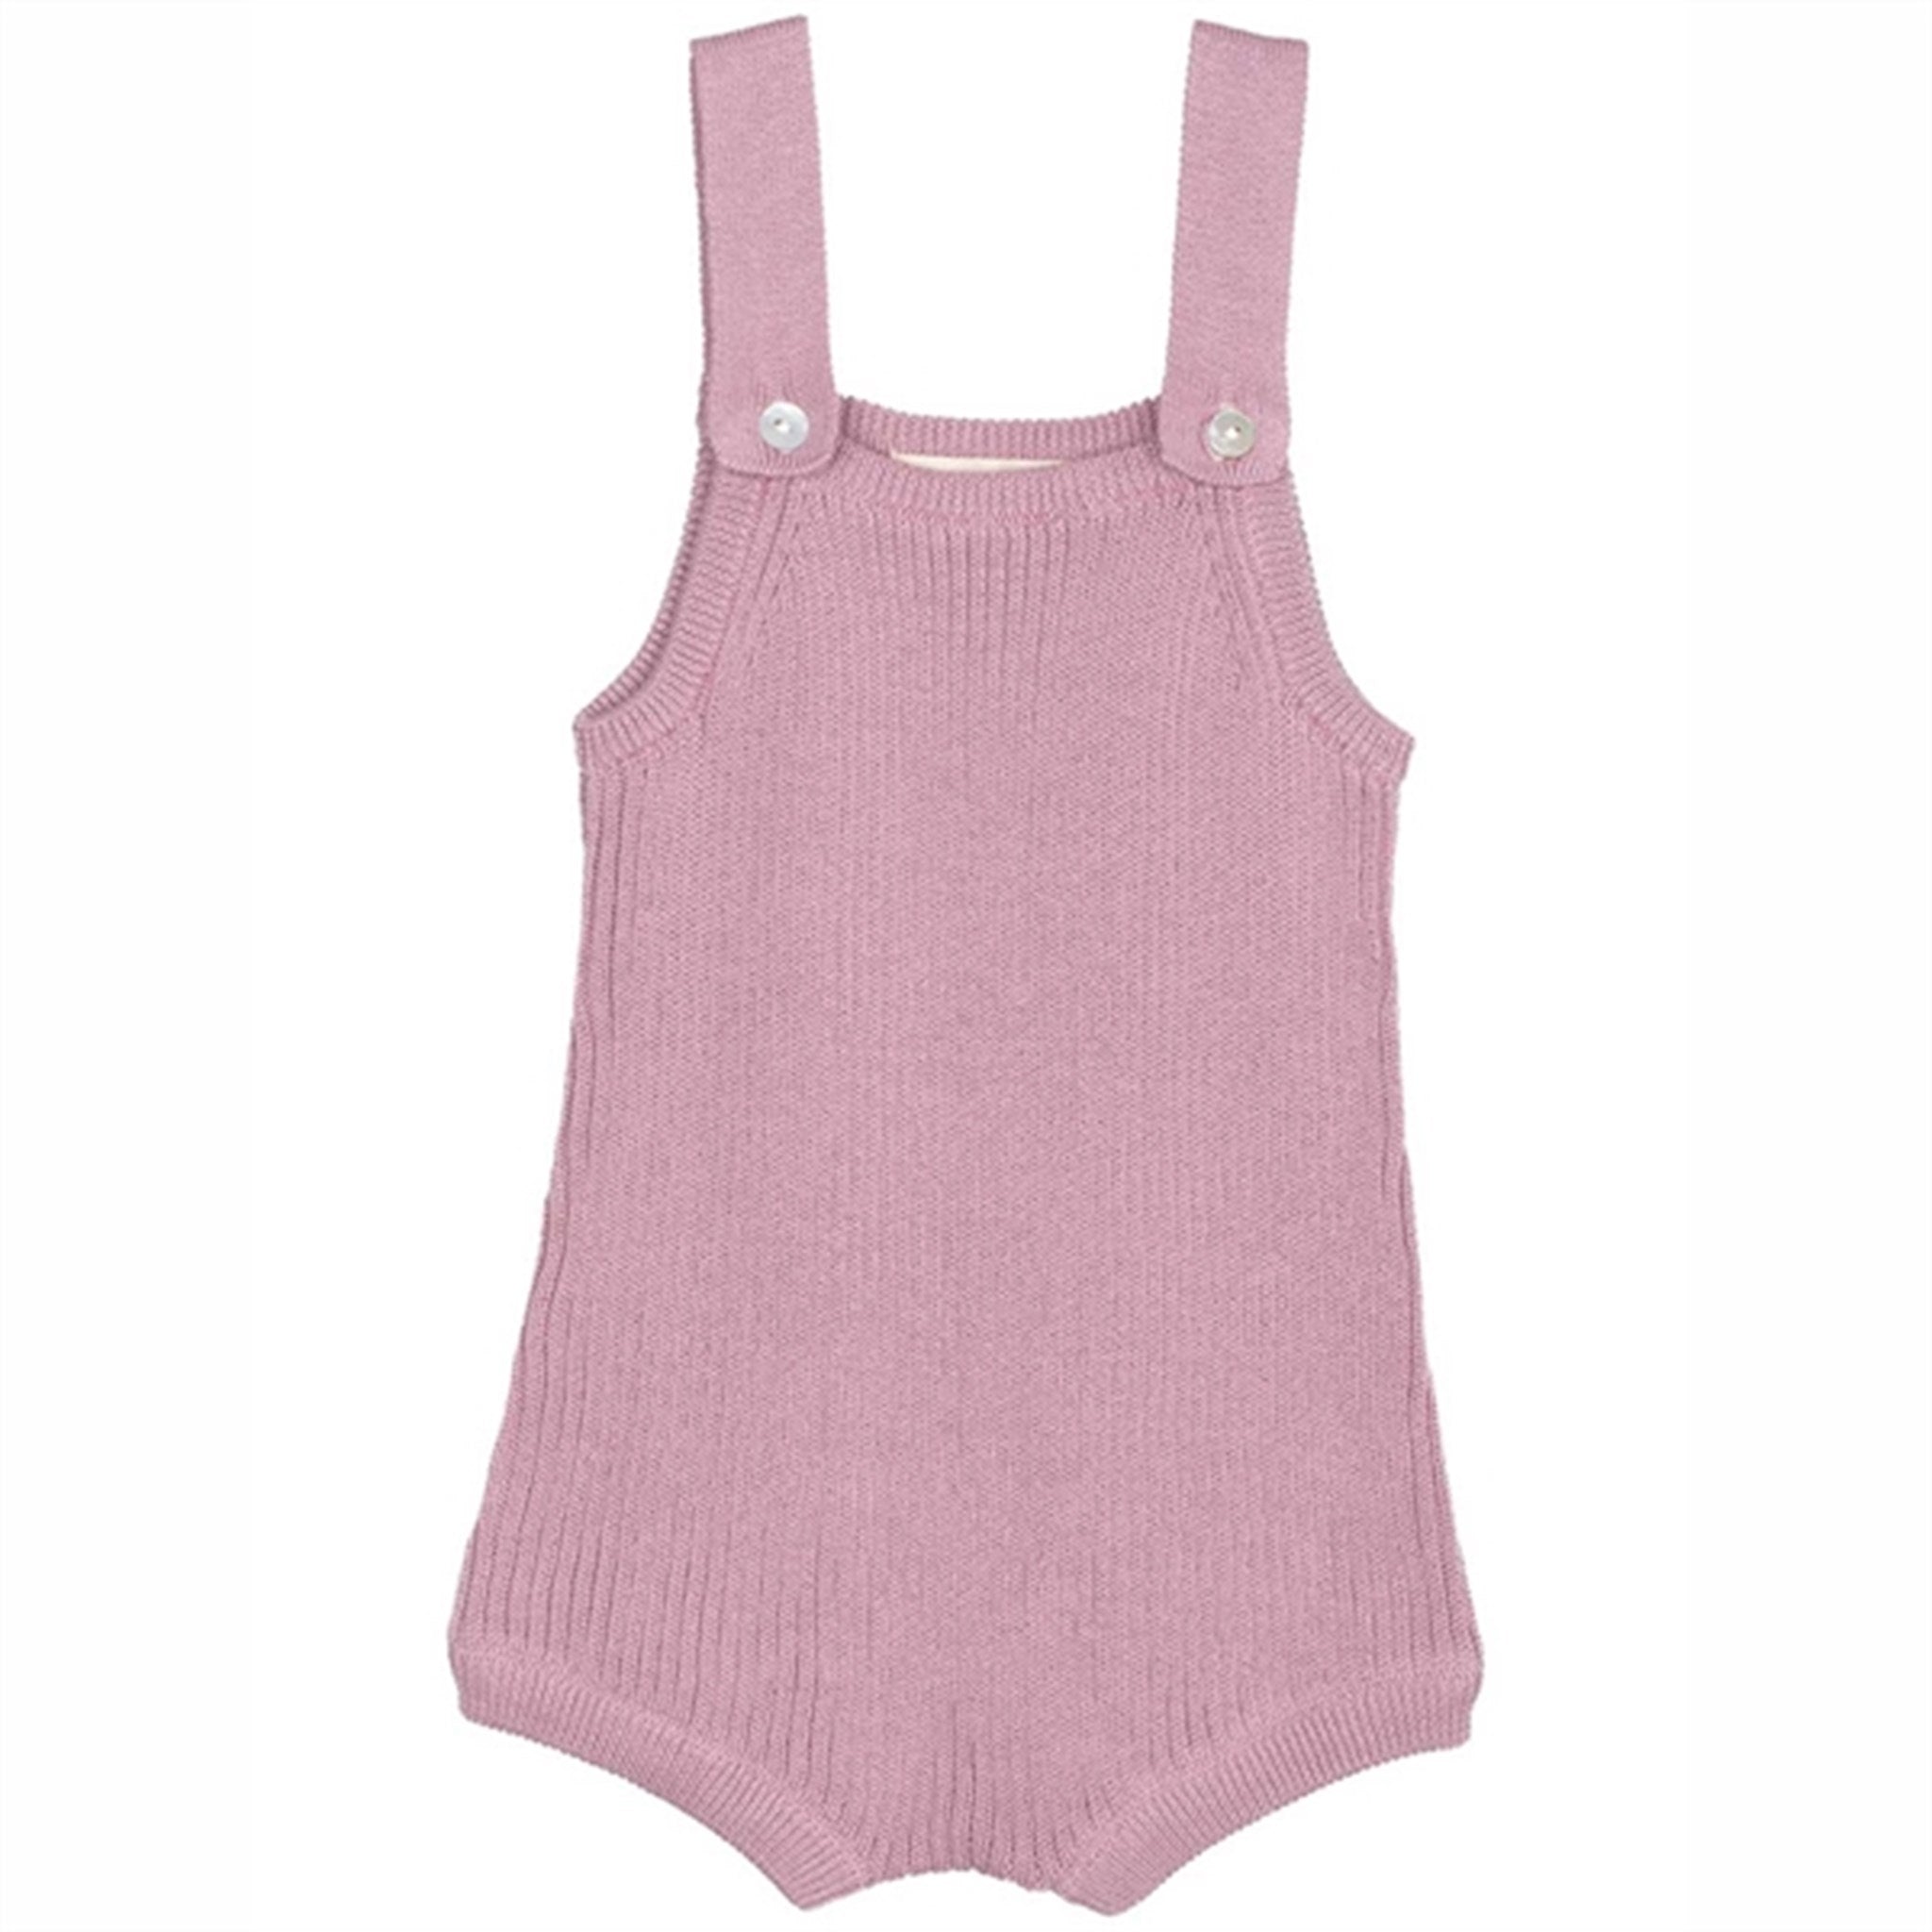 Serendipity Mauve Baby Knit Texture Overall